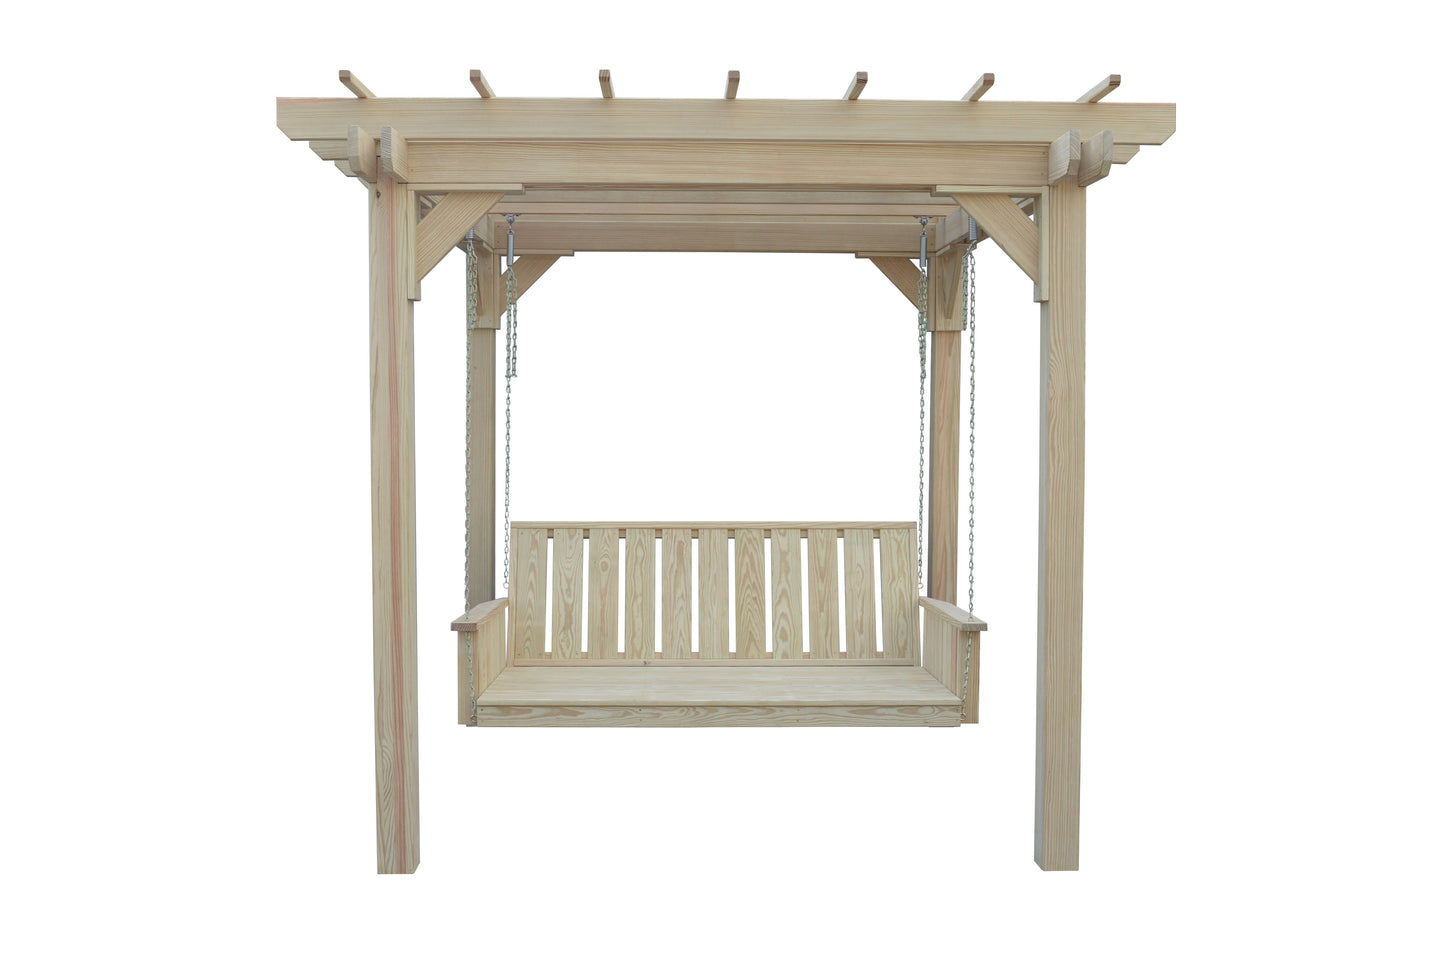 A&L Furniture Co. Pressure Treated Pine 8' x 8' Bradford Pergola with Swing Hangers - LEAD TIME TO SHIP 10 BUSINESS DAYS